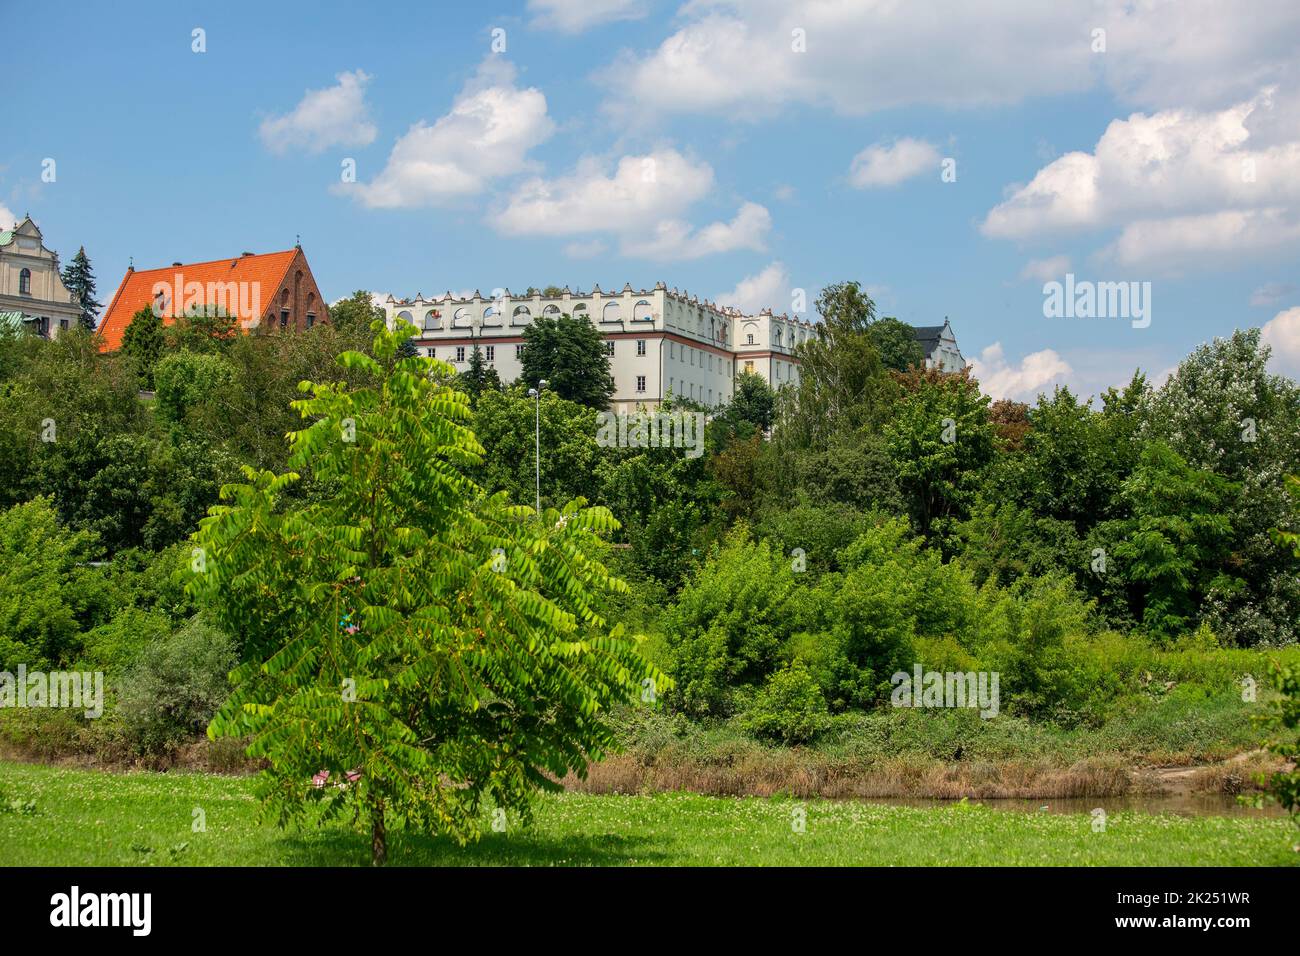 Sandomierz, Poland - July 10, 2020: View of 17th century mannerist style building of Collegium Gostomianum. It is one of the oldest schools in Poland Stock Photo